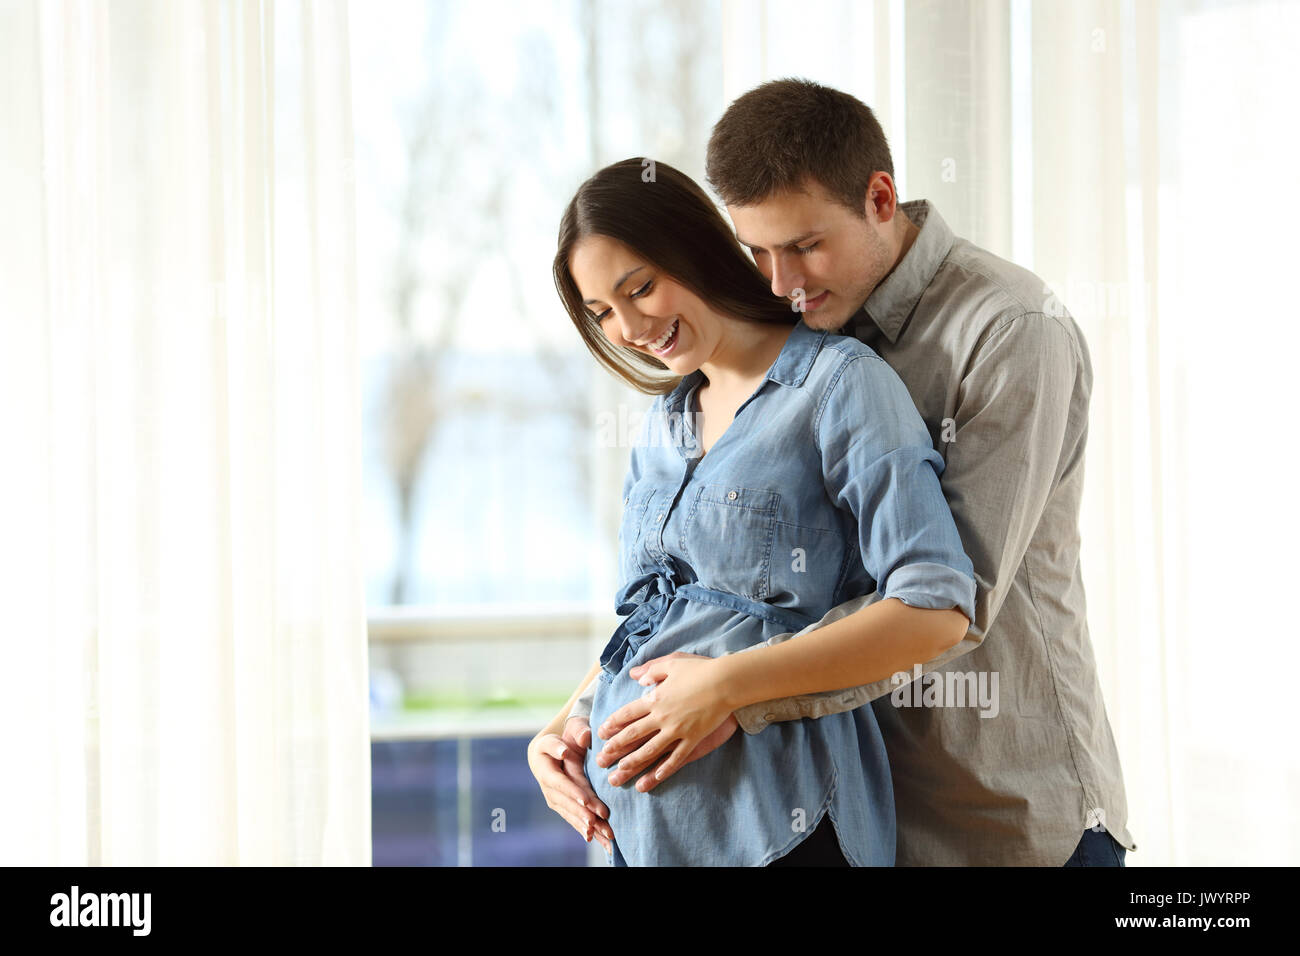 Pregnancy Mom Dad Hugging Belly Hi Res Stock Photography And Images Alamy